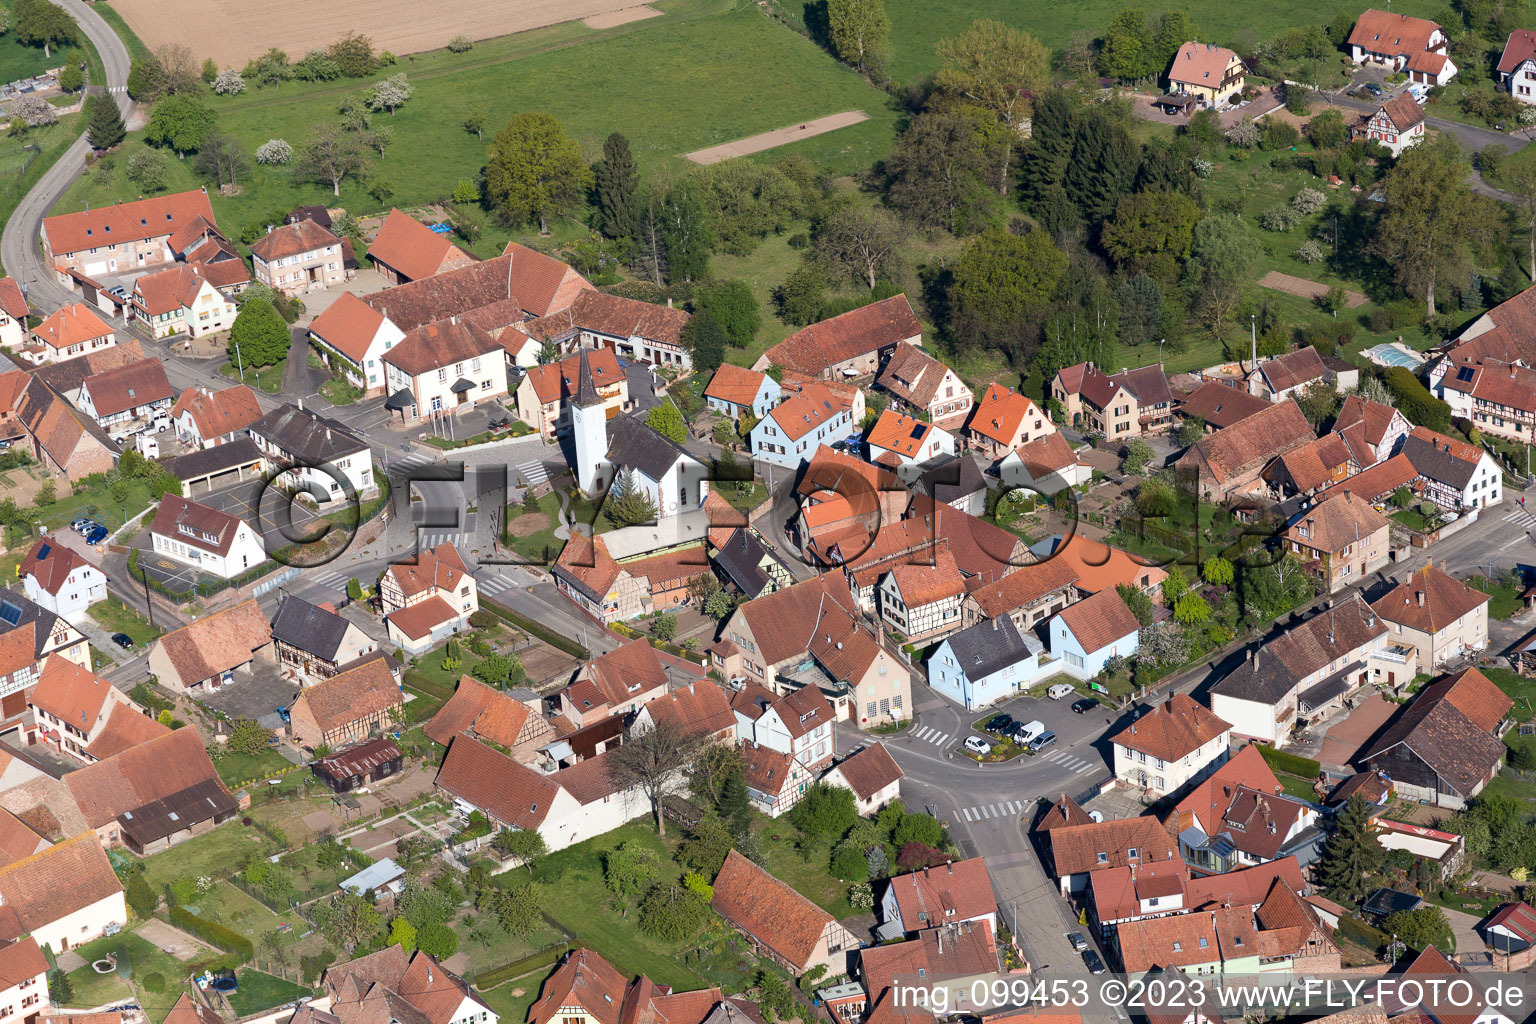 Aerial view of Mulhausen in the state Bas-Rhin, France